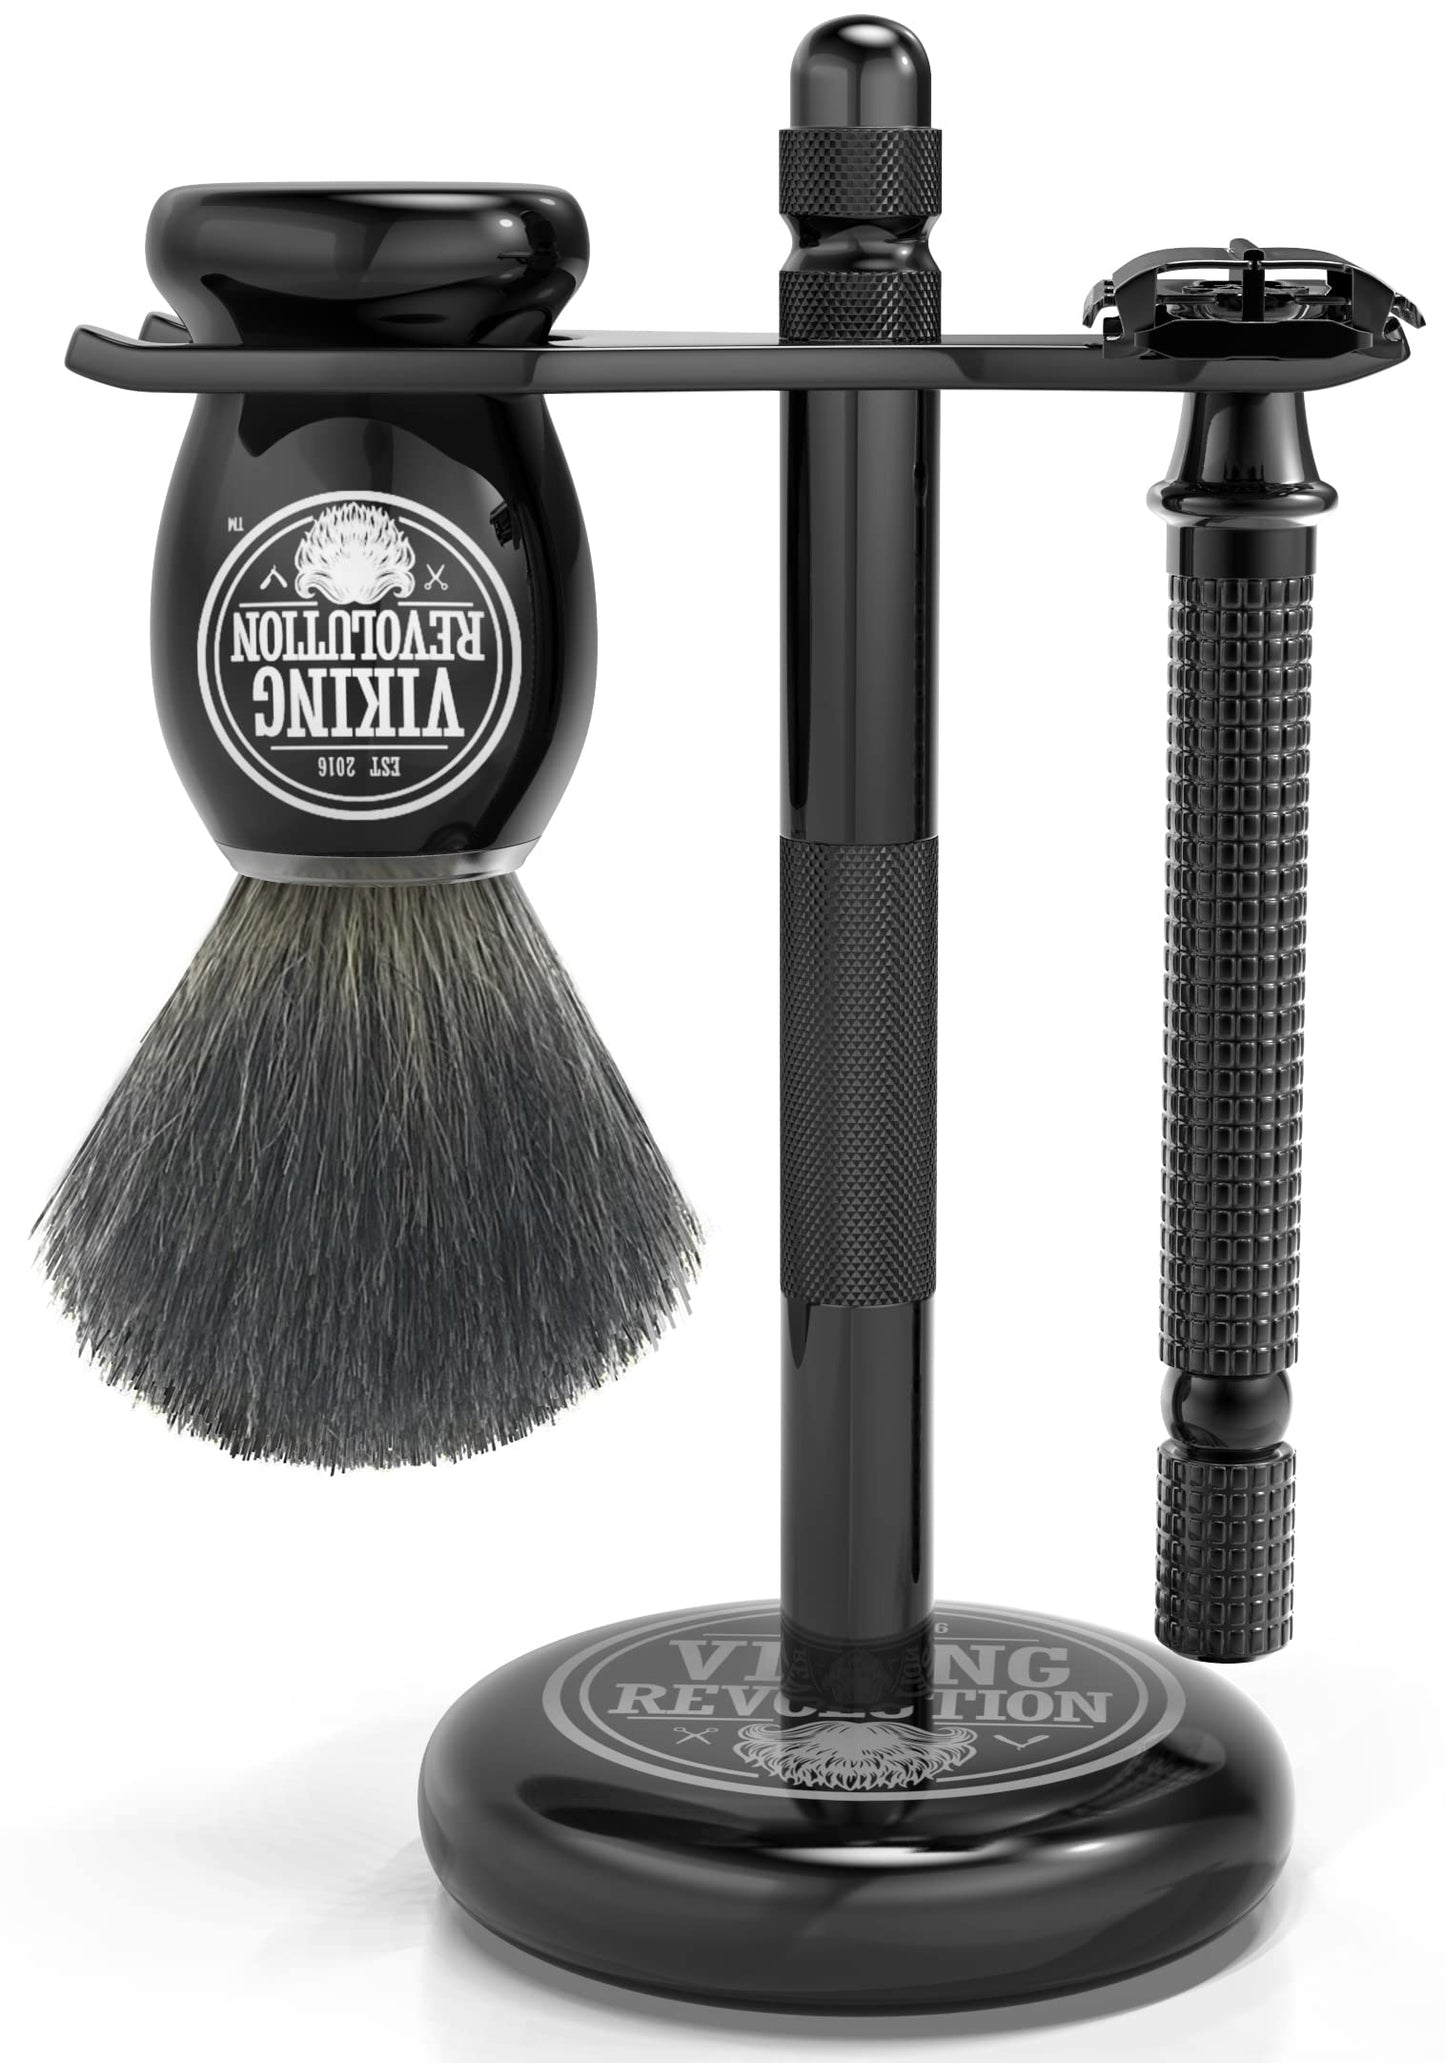 Viking Revolution Black Safety Razor Stand - Razor Holder and Shaving Brush Stand to Prolong the Life of Your Razor - Weighted Bottom for Extra Stability